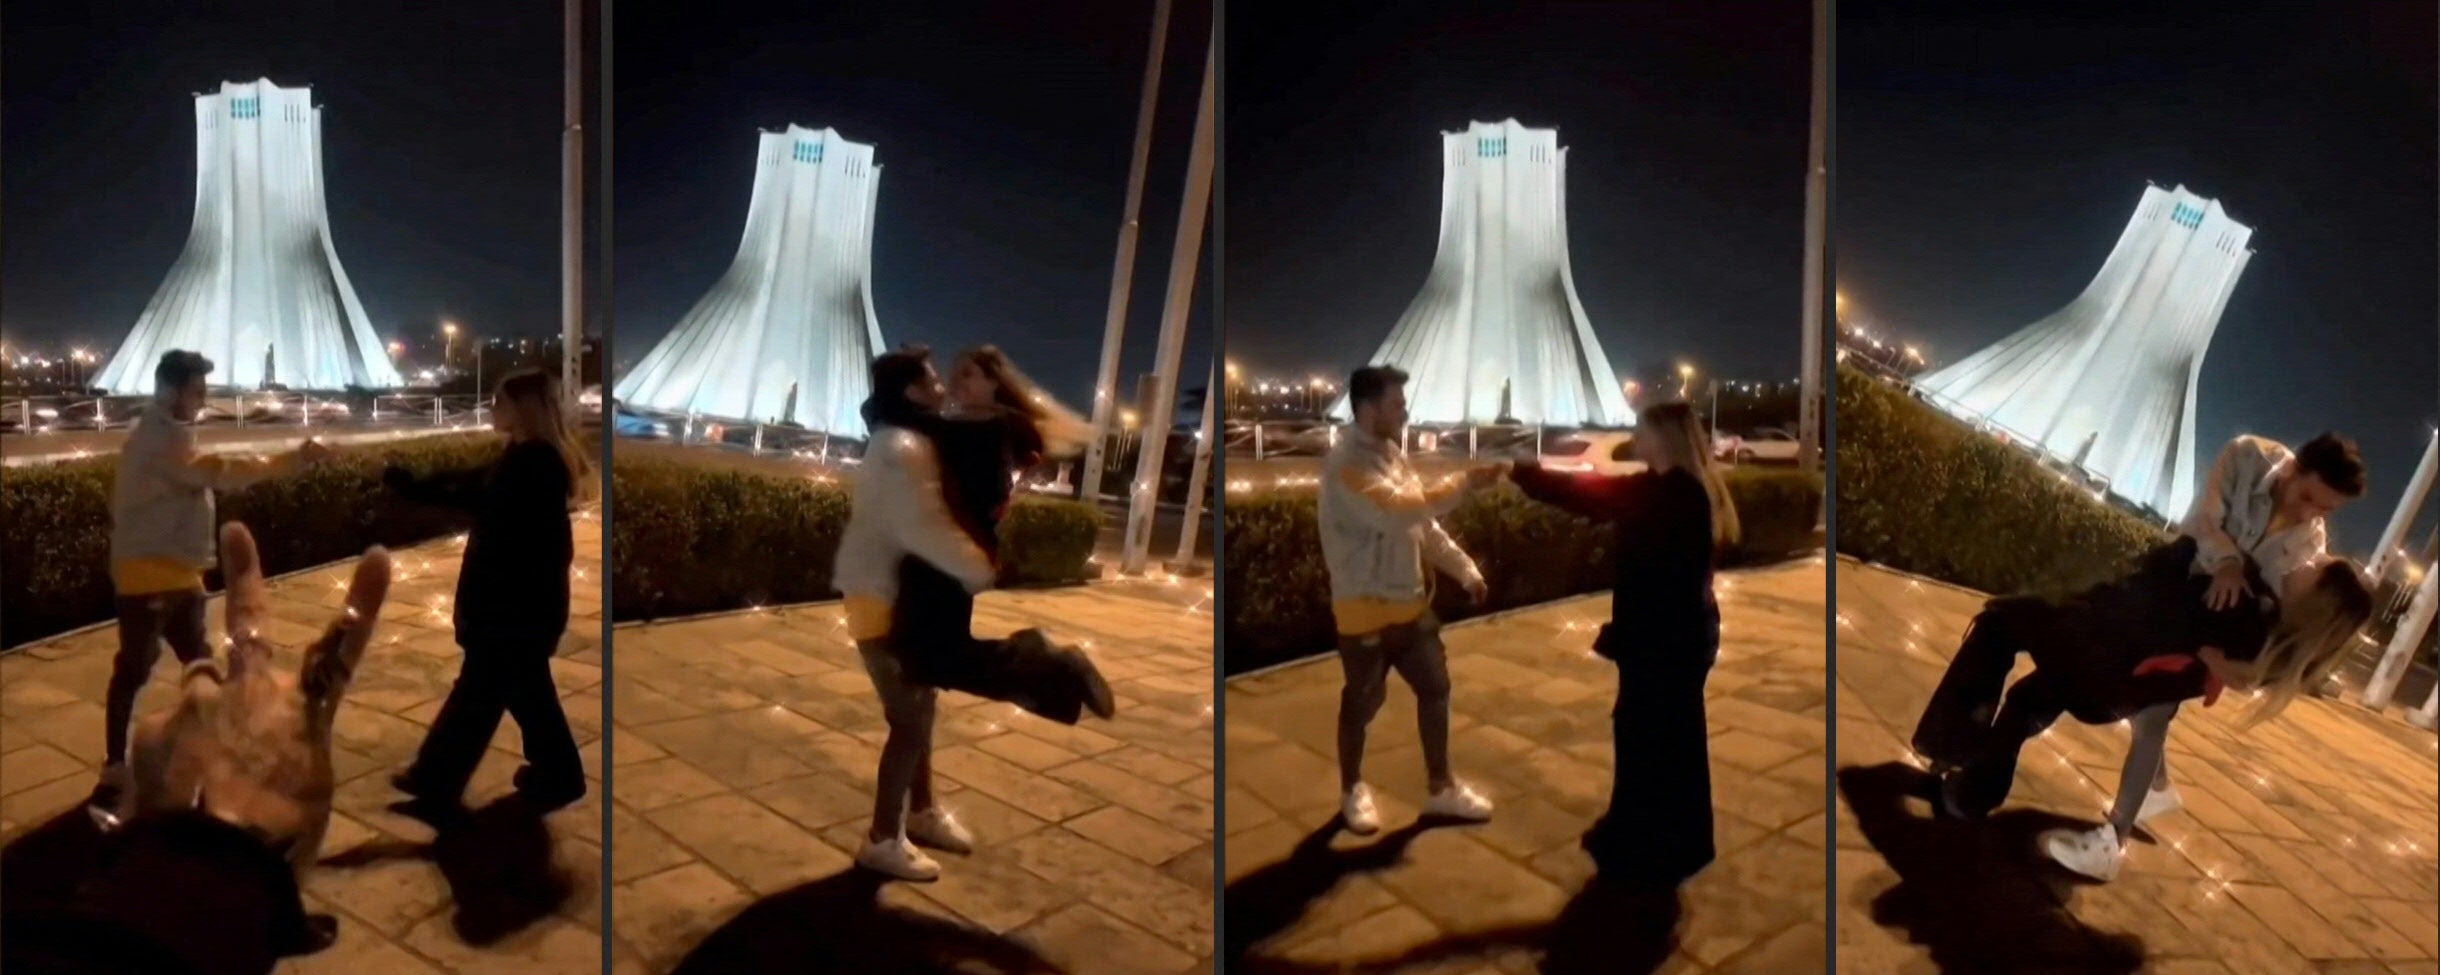 Stills from the video showing Astiyazh Haghighi and her fiance Amir Mohammad Ahmadi dancing in front of Tehran’s Azadi Tower